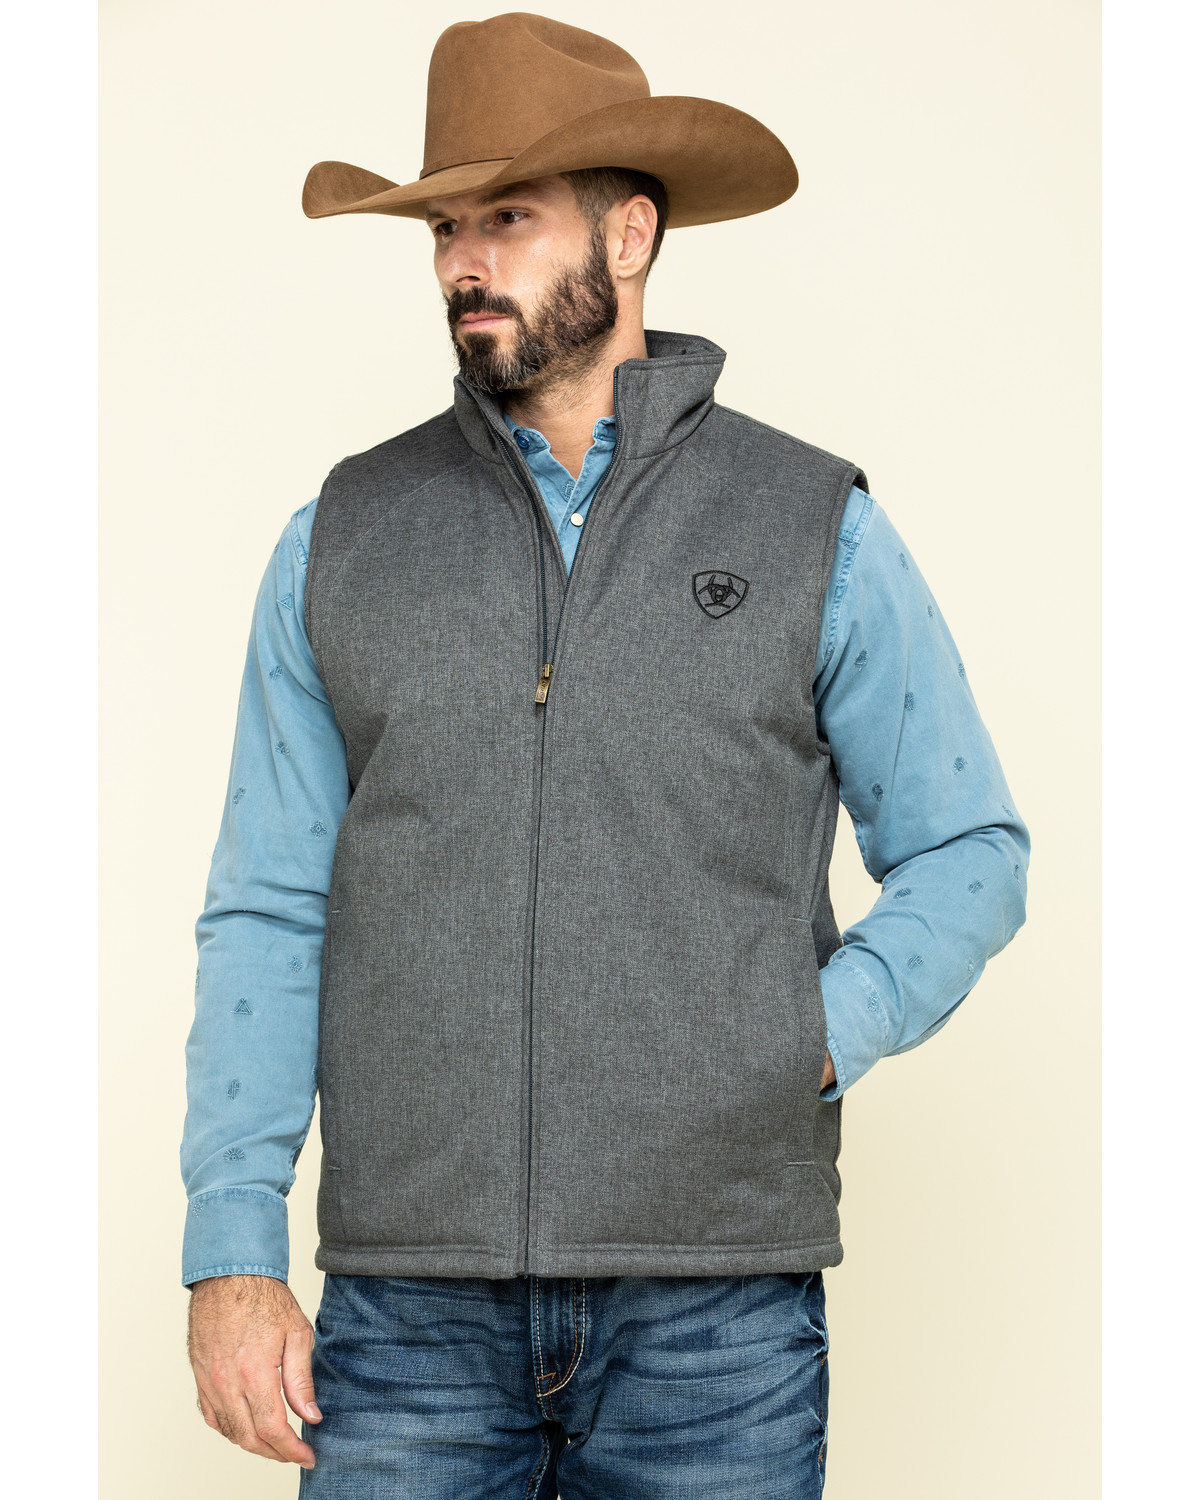 Ariat Men's Charcoal Team Vest - Country Outfitter